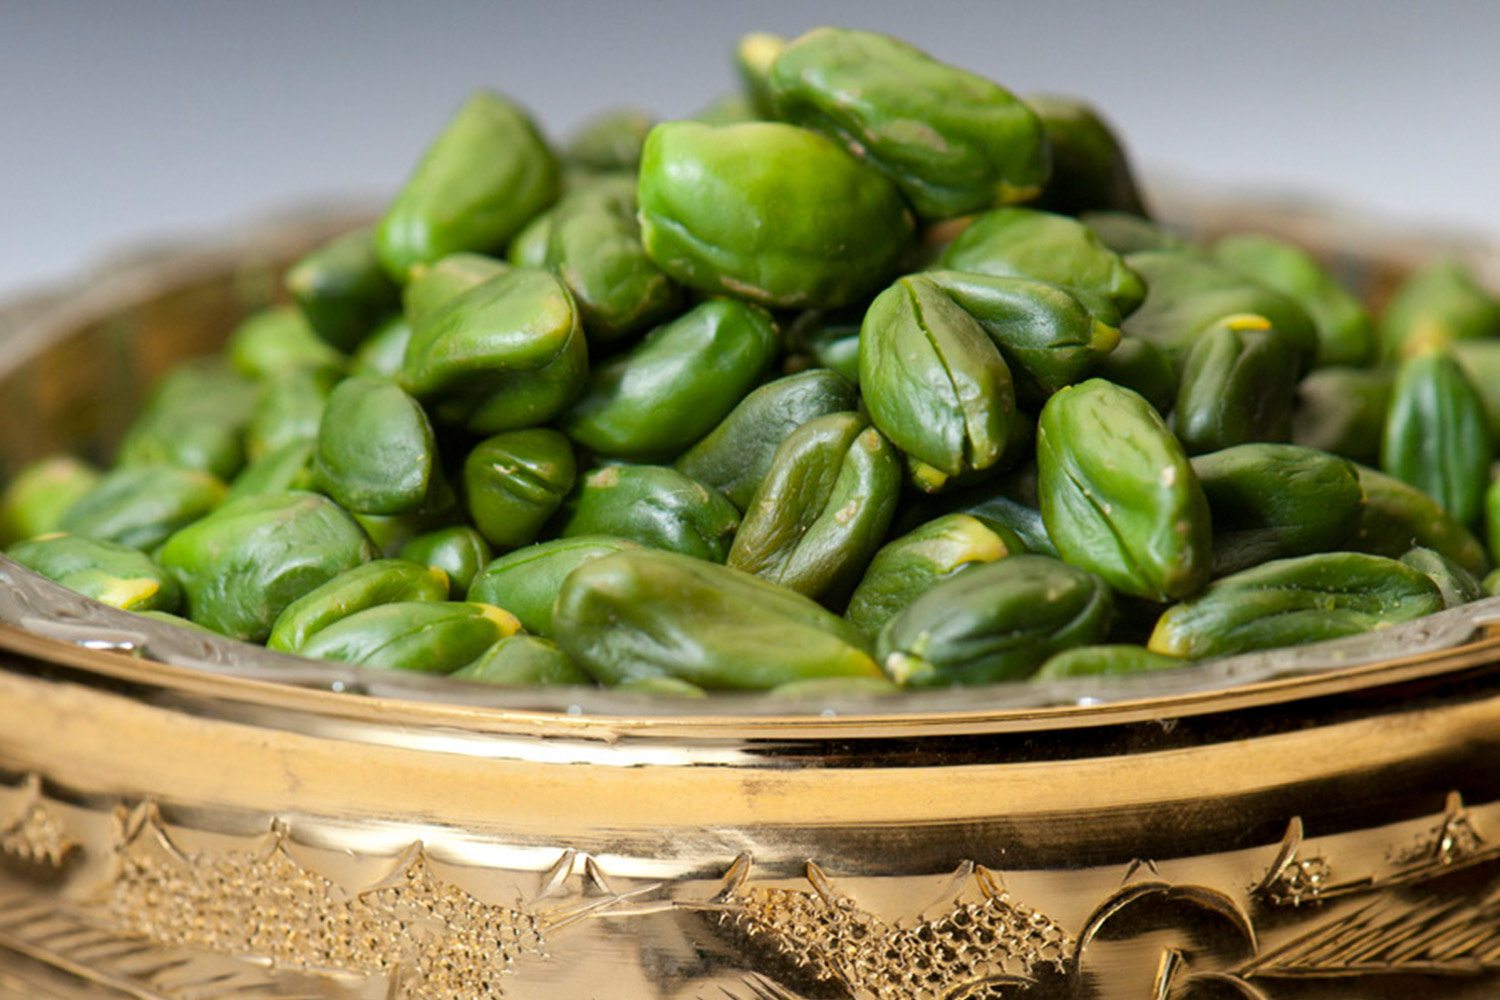 How Can I Buy Pistachio Nuts? | Nutex Iranian Pistachio Nuts